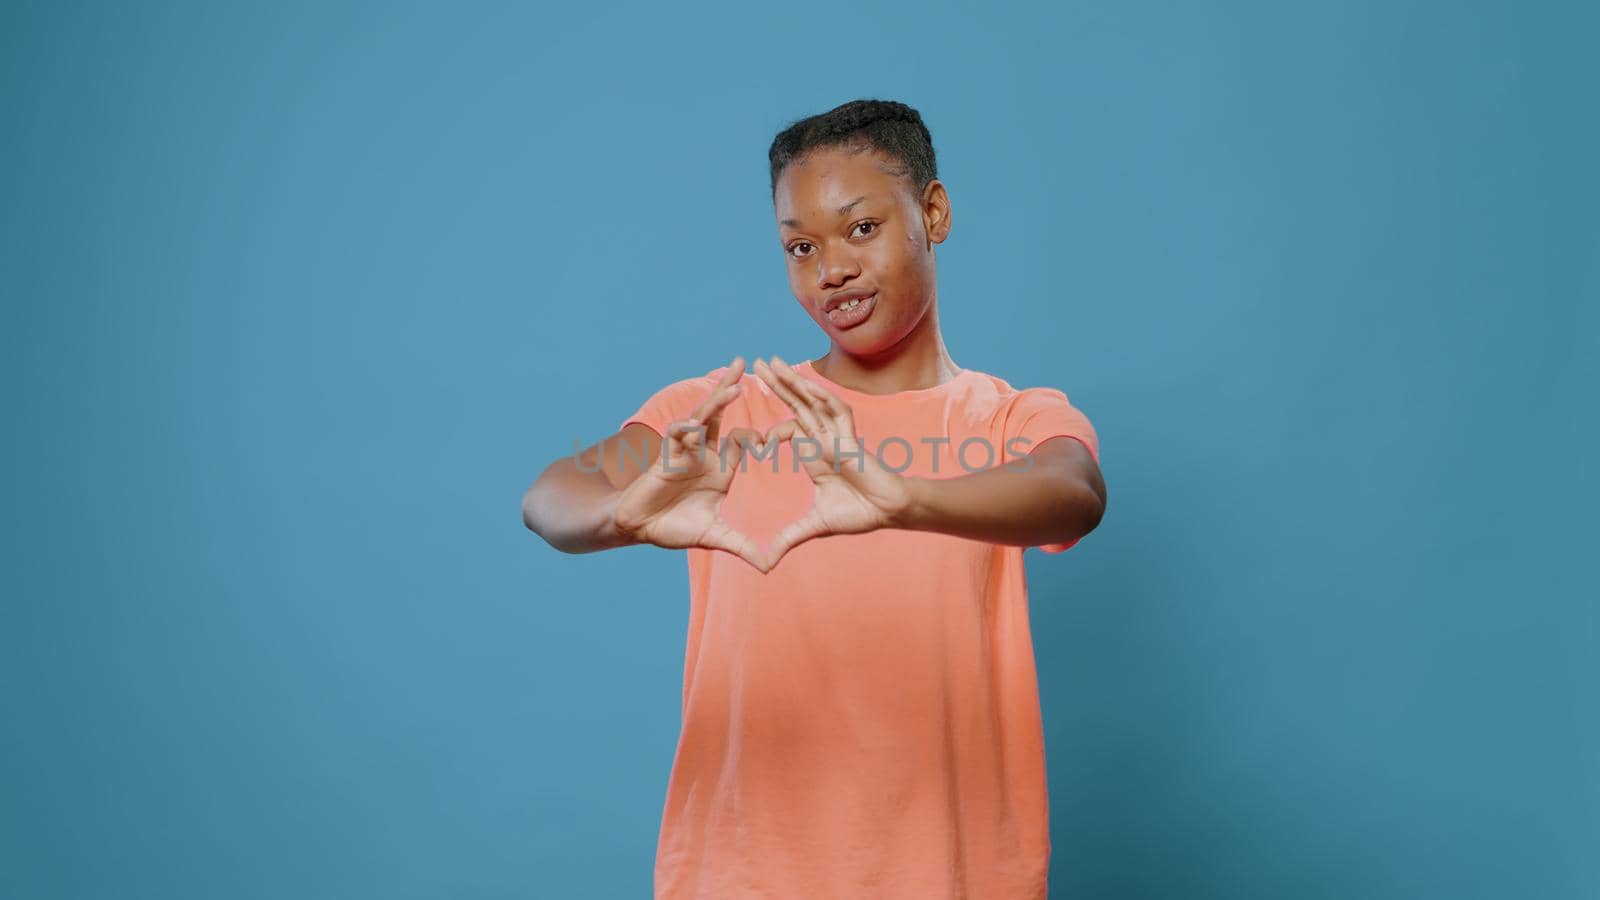 Young woman doing heart shape symbol with hands in studio. Affectionate person showing love sign and romantic gesture, expressing feelings and affection, standing over isolated background.